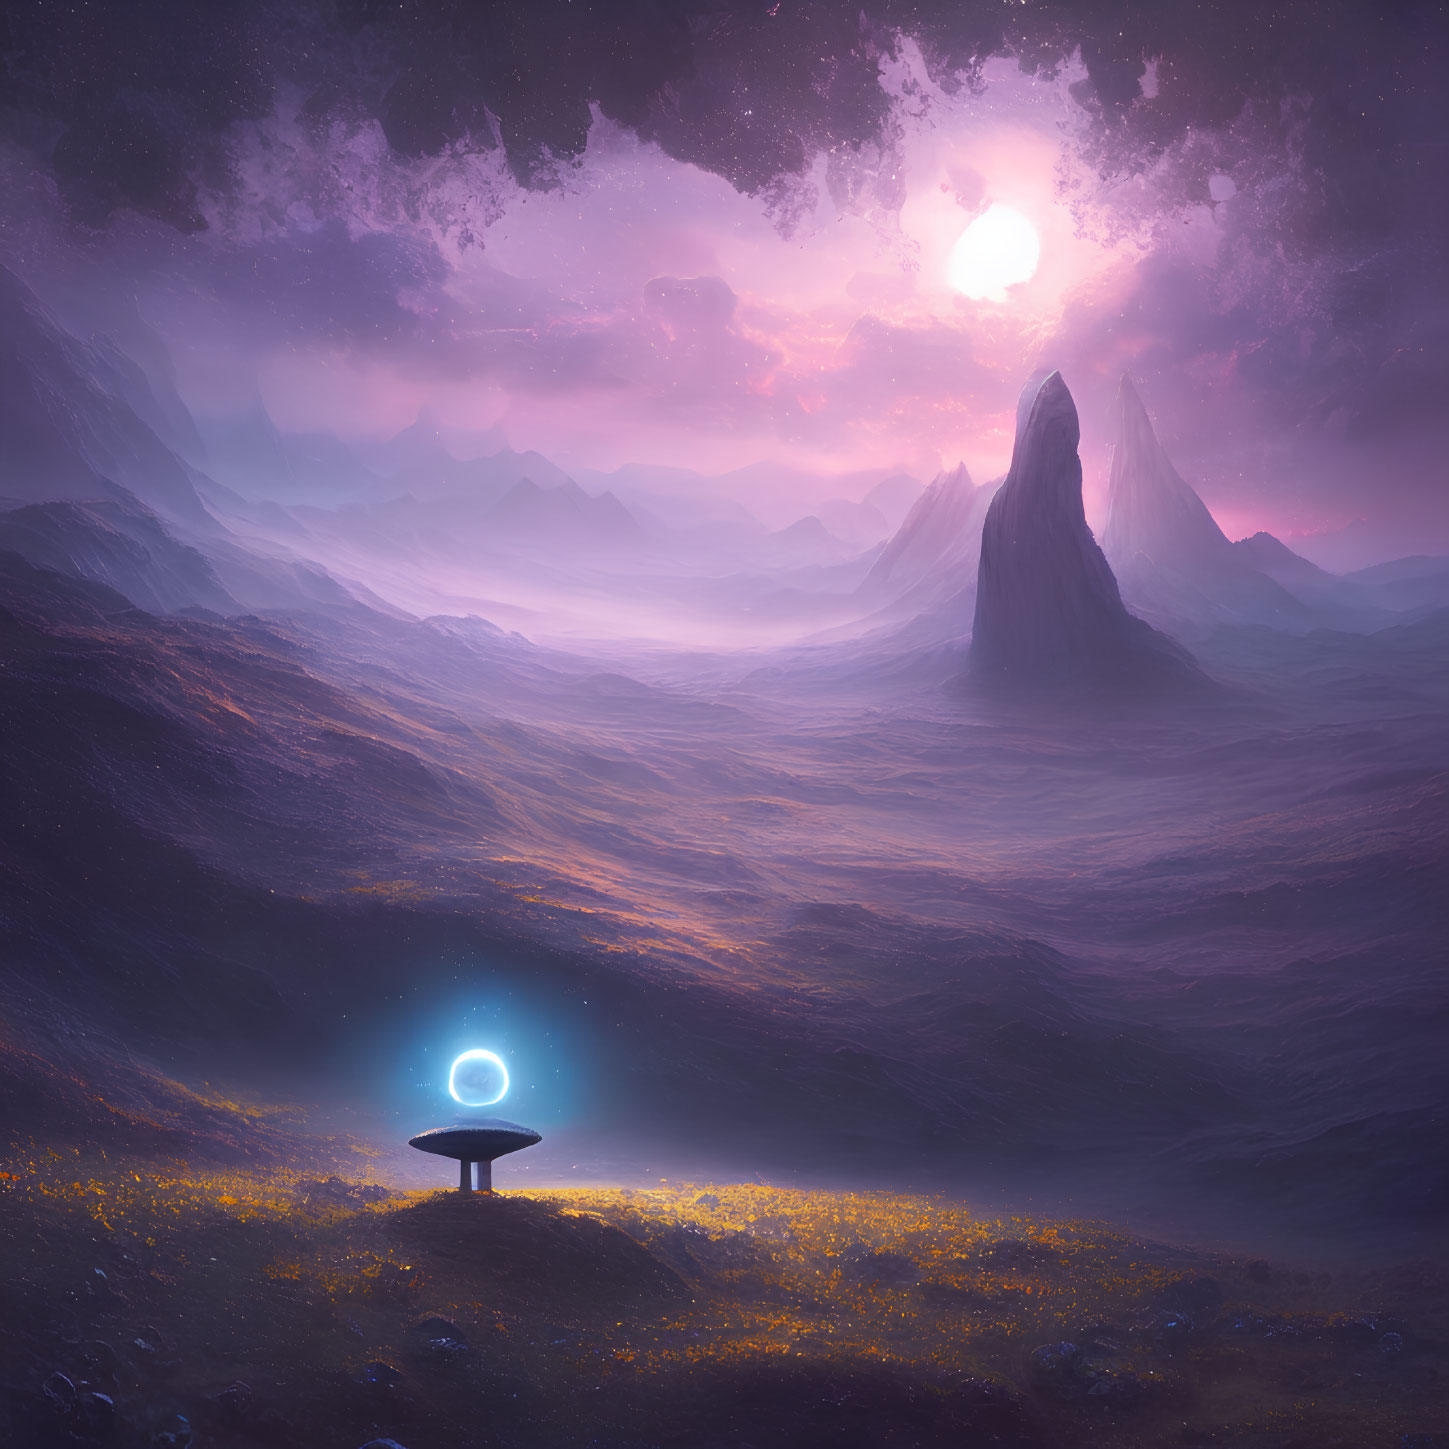 Fantasy landscape at dusk with glowing orb, yellow flowers, mountains, starlit sky